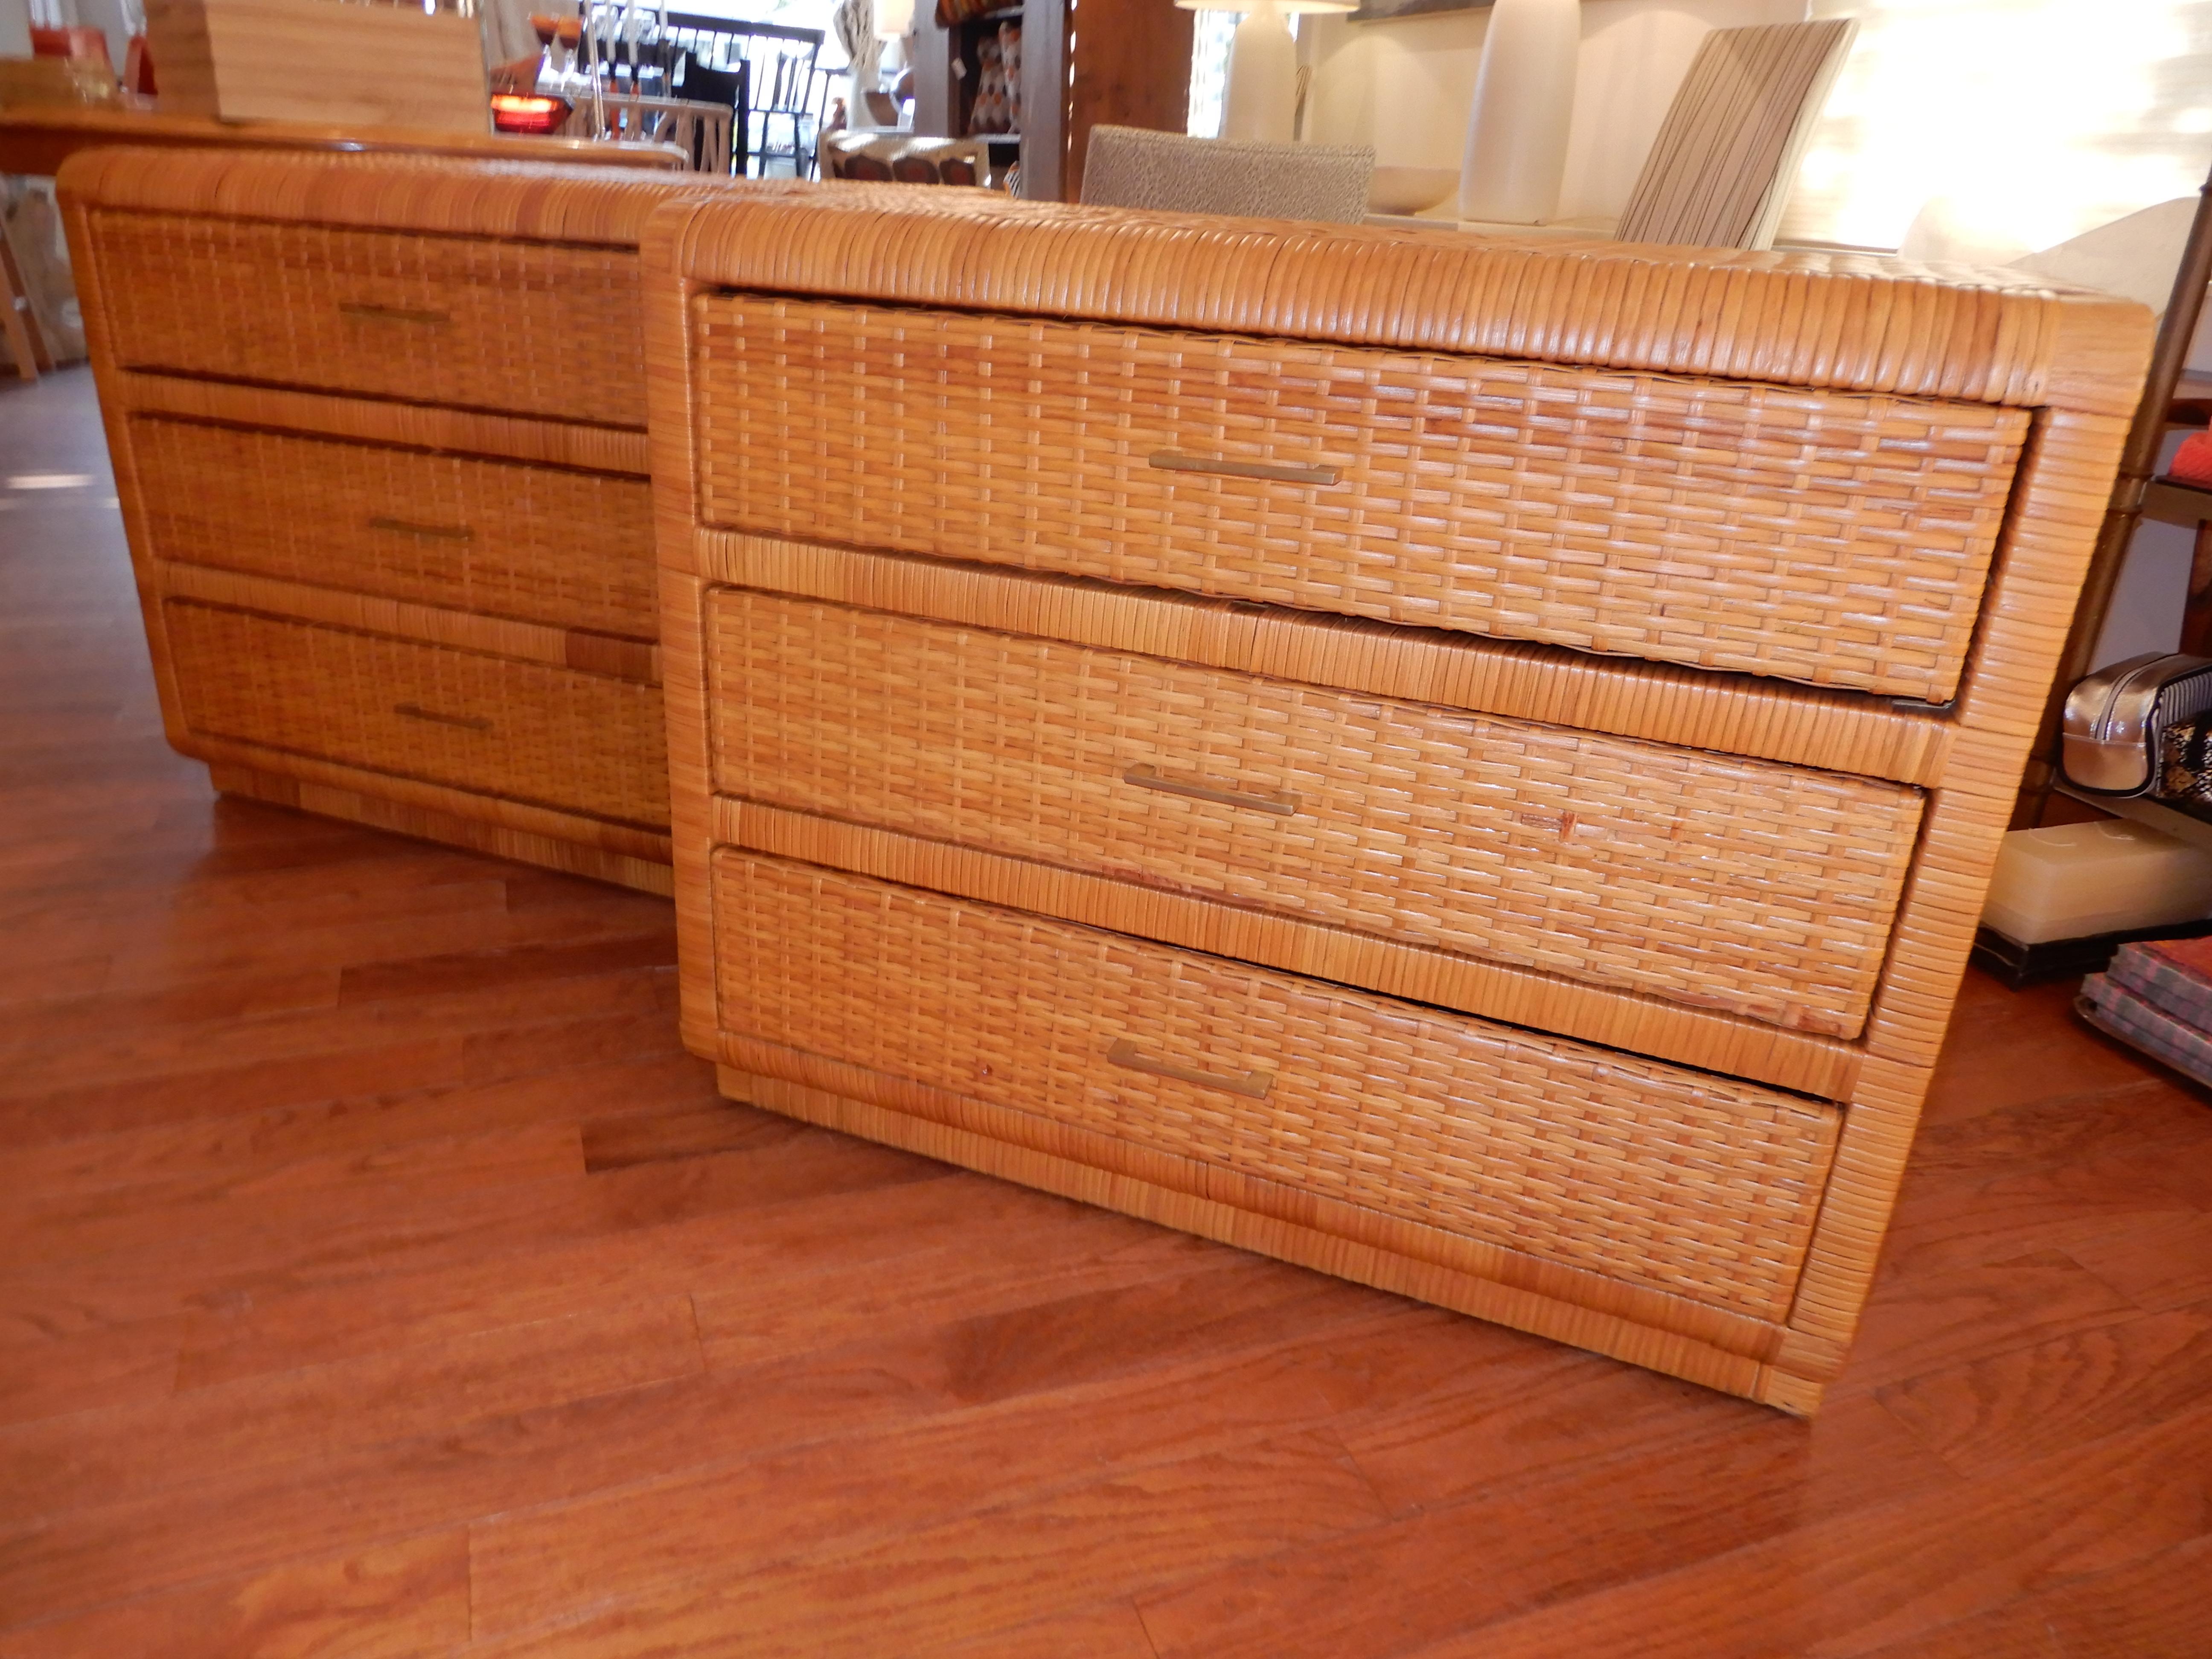 Pair of Fick's & Reed woven rattan three drawer chests or dressers, with original brass pulls, nice rounded features at corners, variation between bottom drawer and base giving a platform appearance, immaculate condition, dated around 1970s.U.S.A.